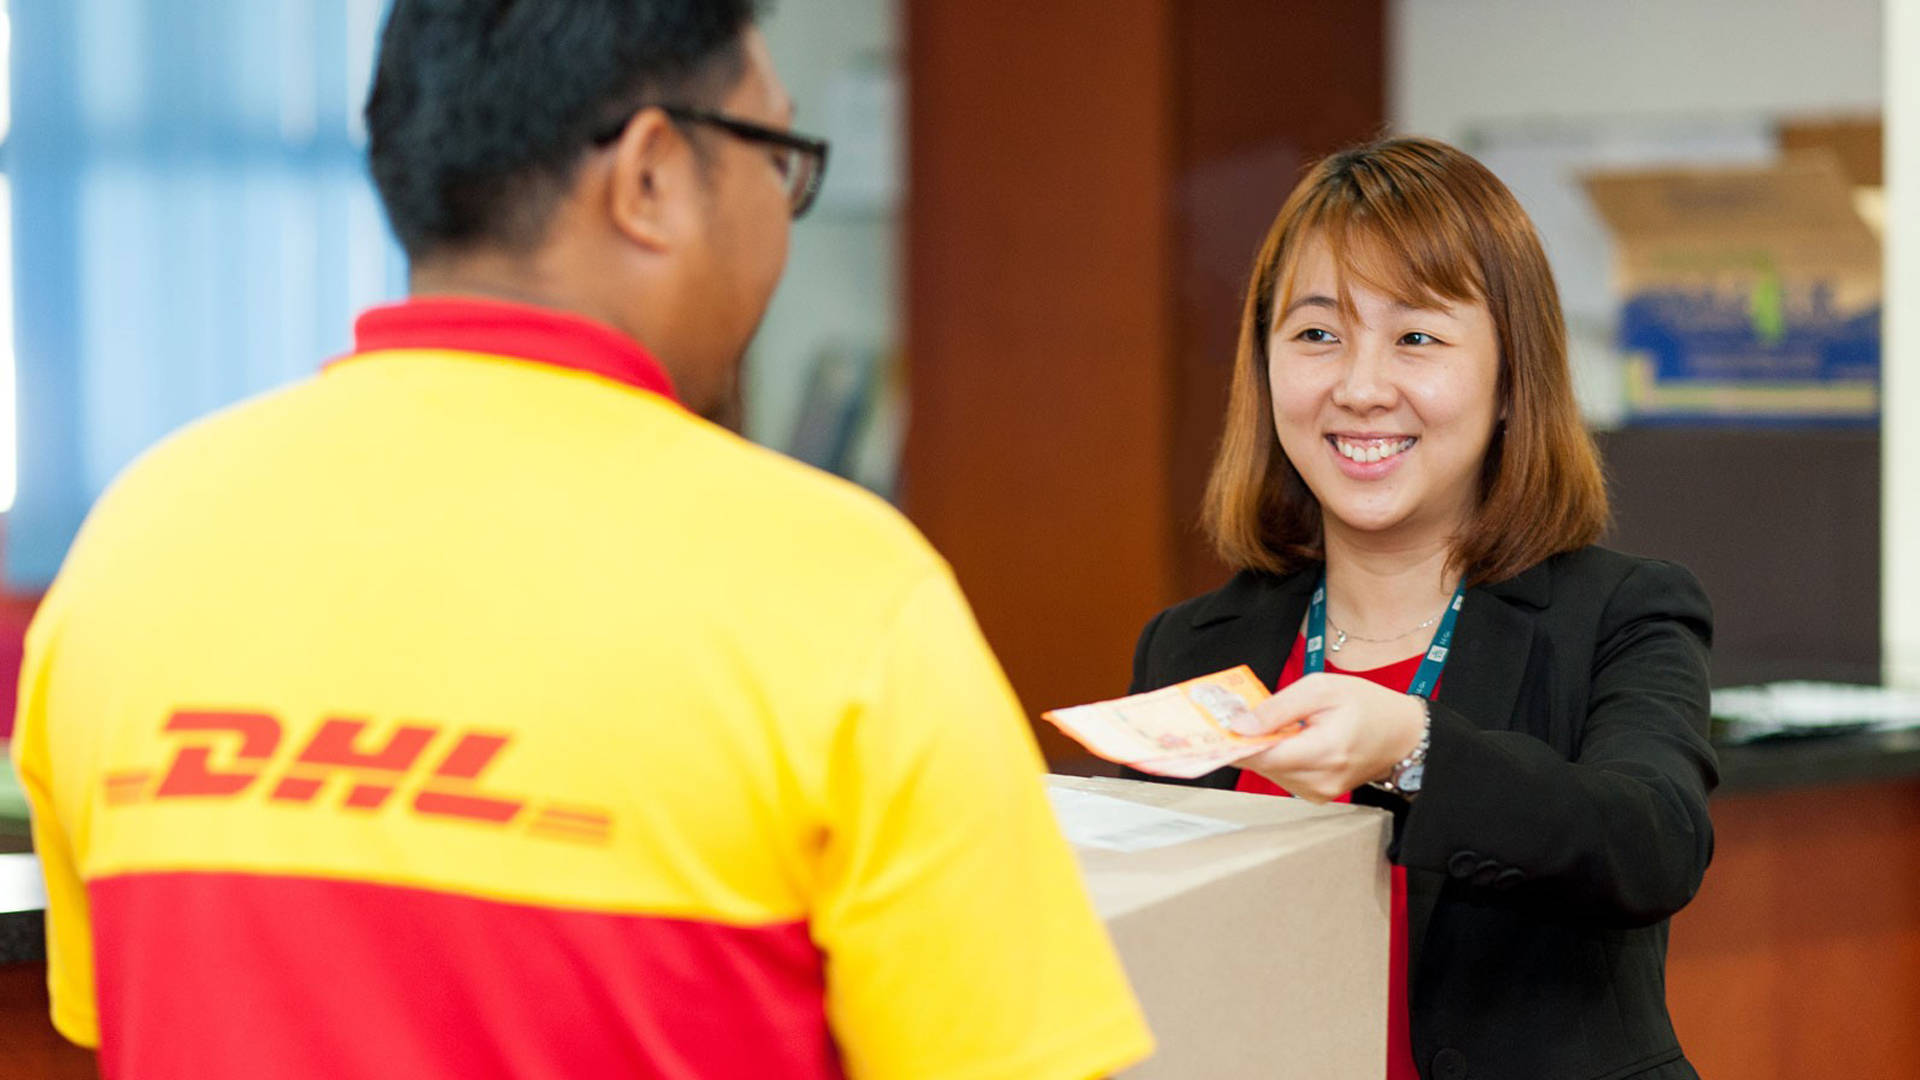 Download Fast Dhl Delivery Boy Wallpaper 